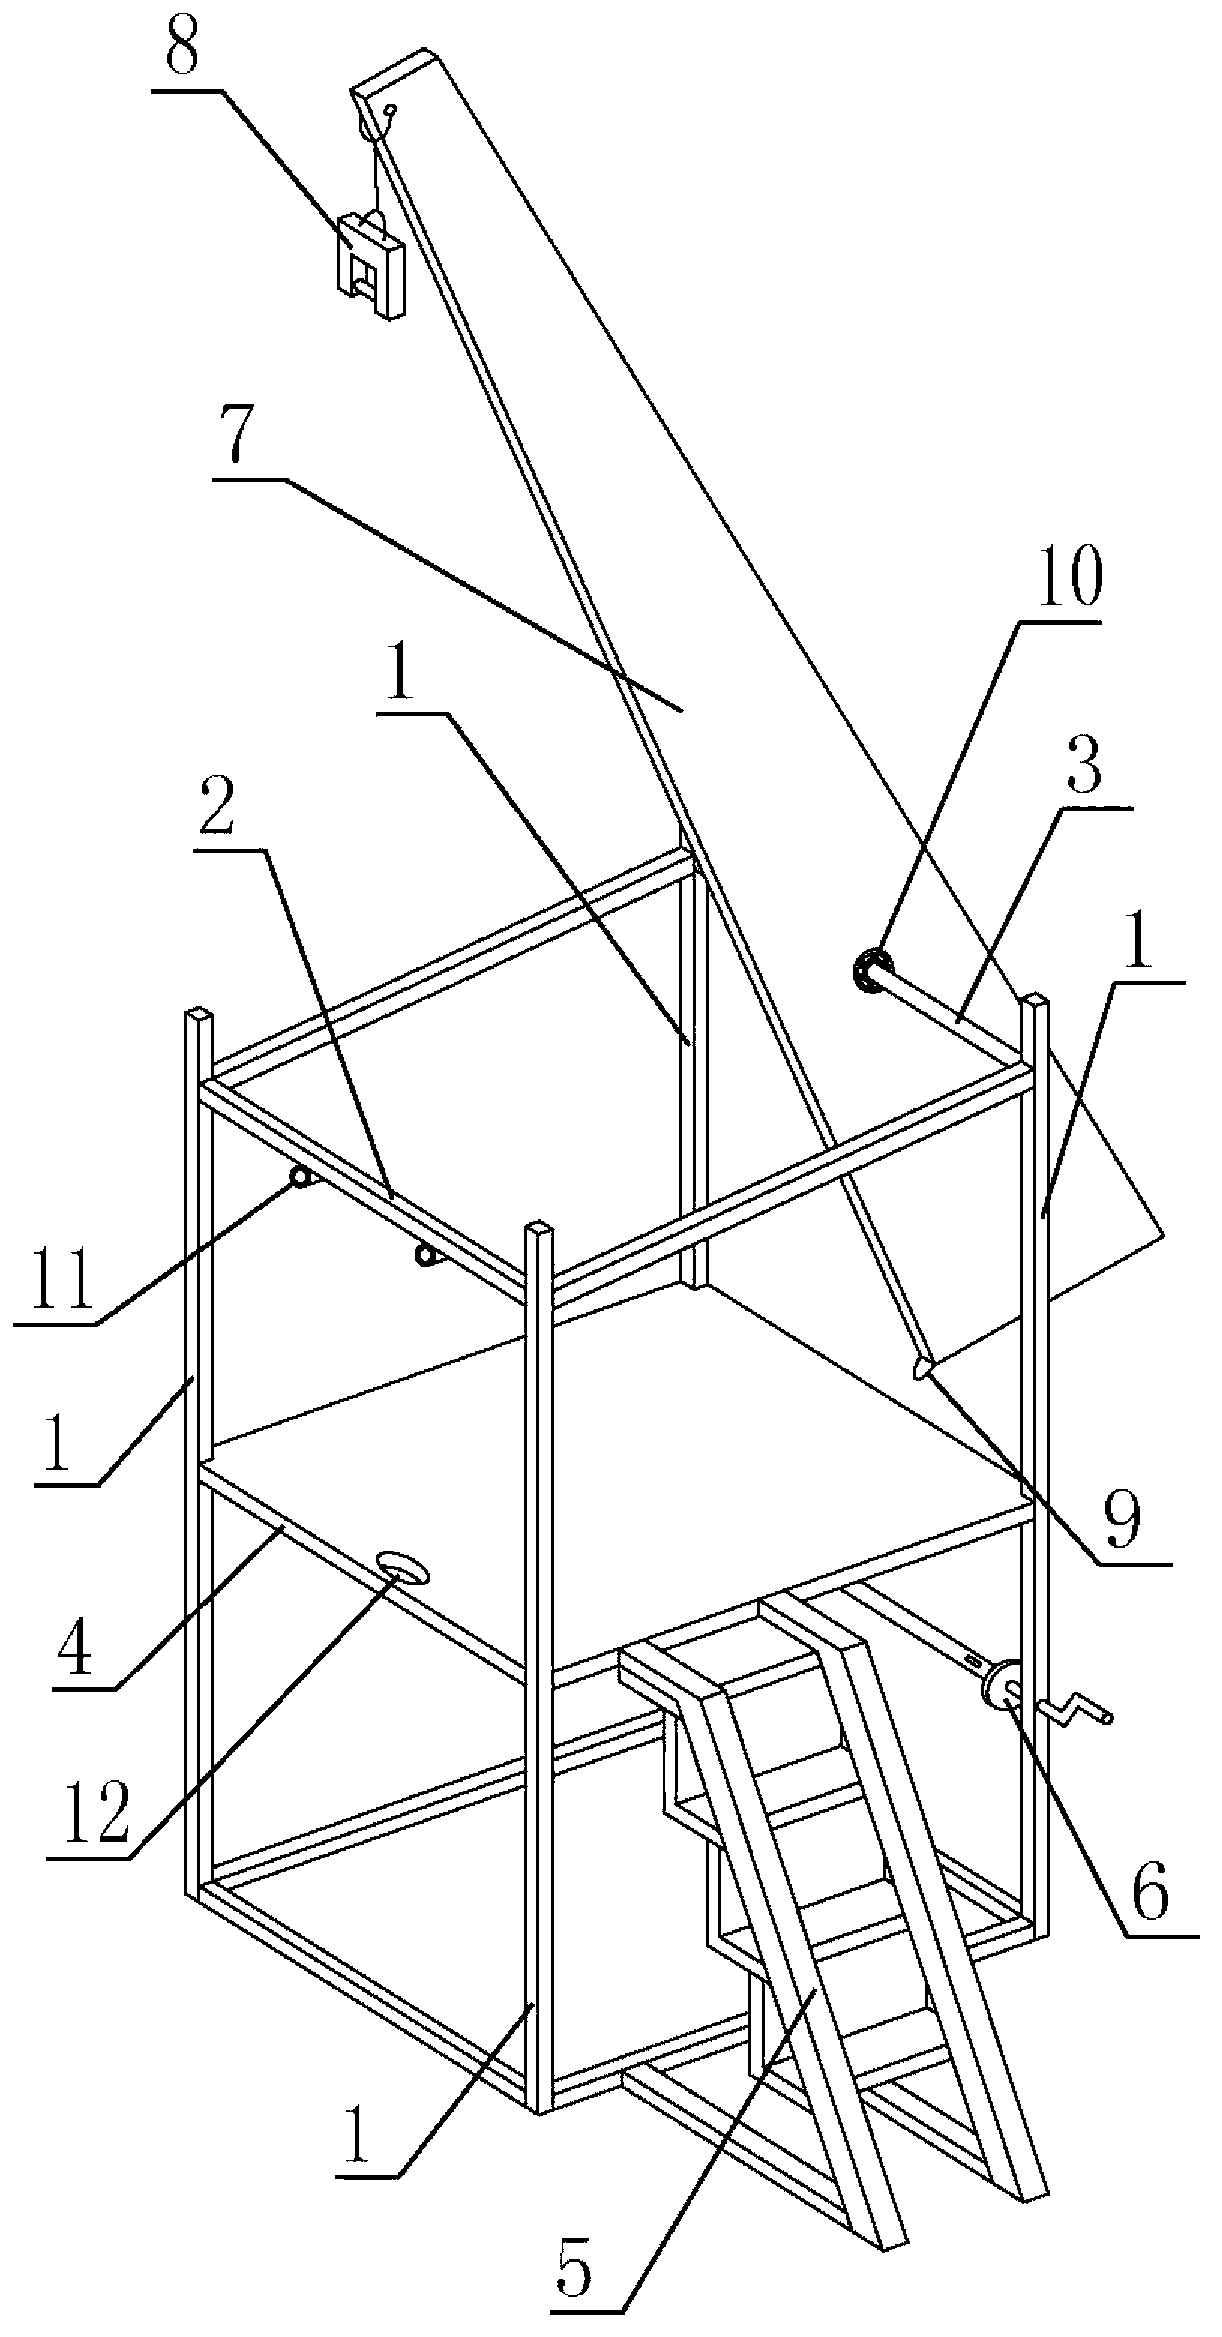 Hoisting ring cable lifesaving device for high-rise building fire escape and application method thereof